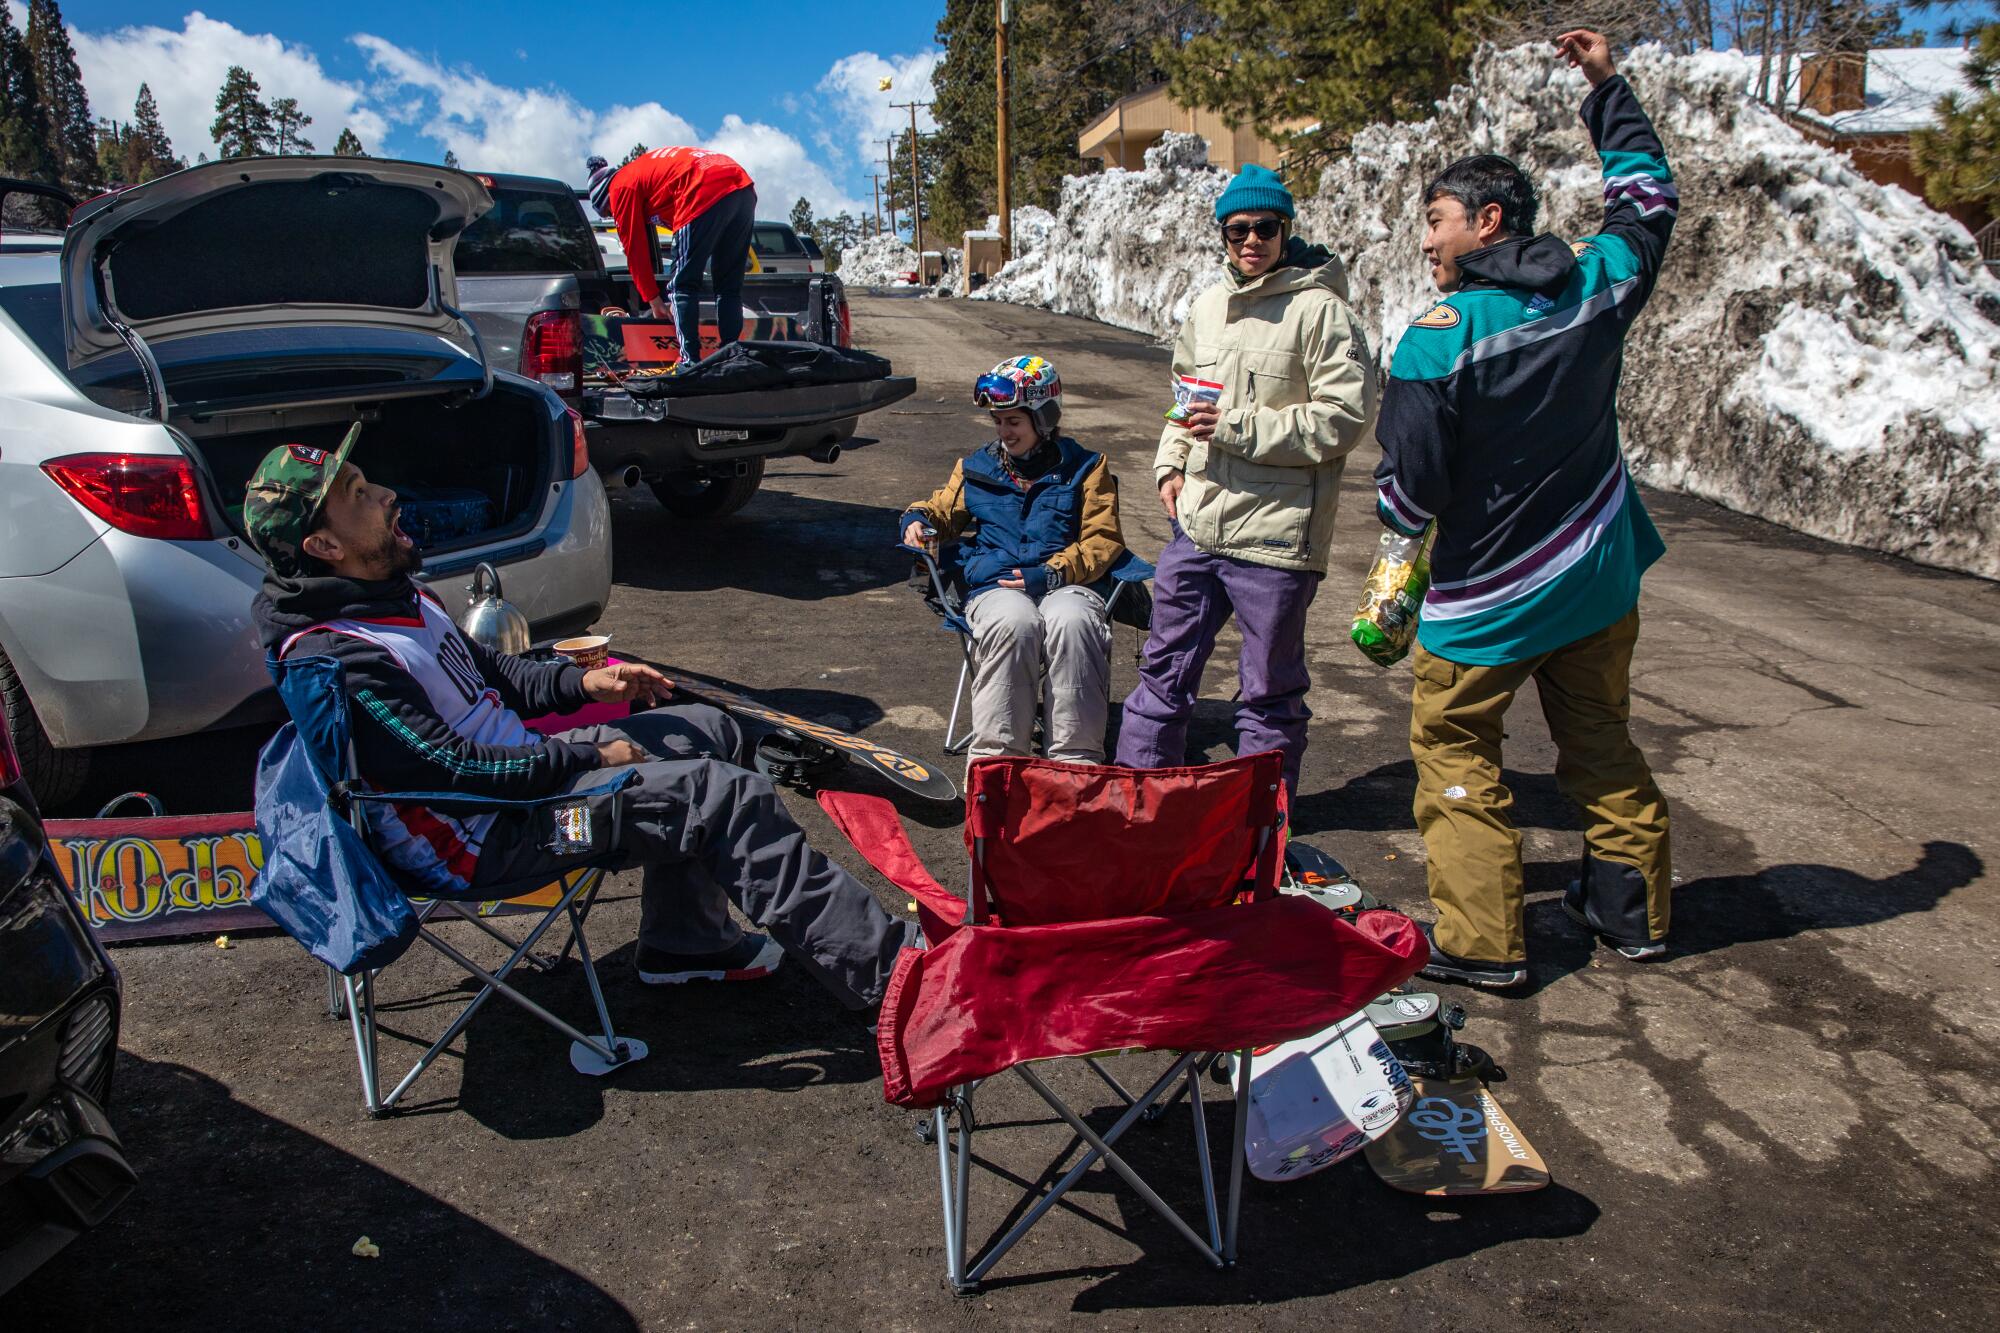 Four snowboarding friends have a tailgate picnic at Big Bear Mountain Resort.